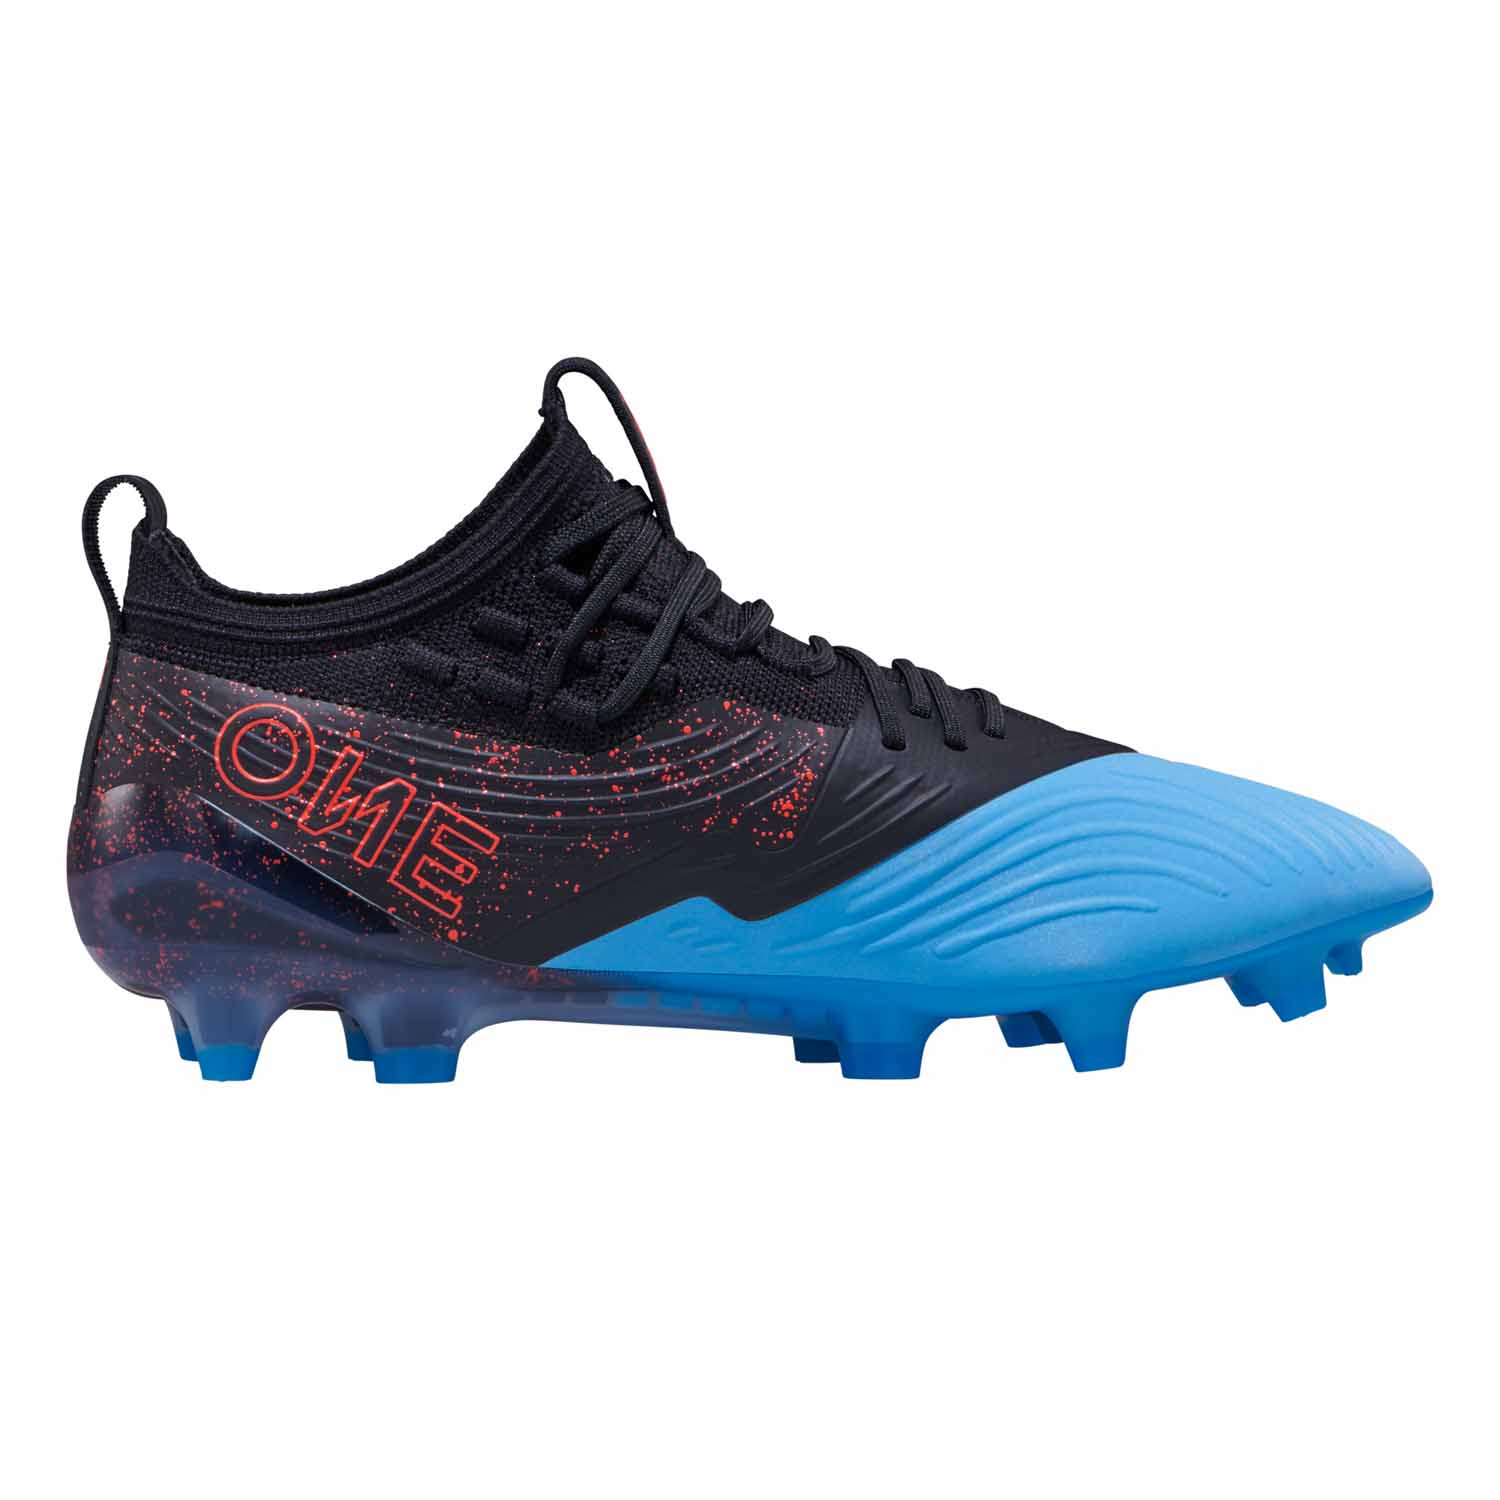 puma one 19.1 synthetic